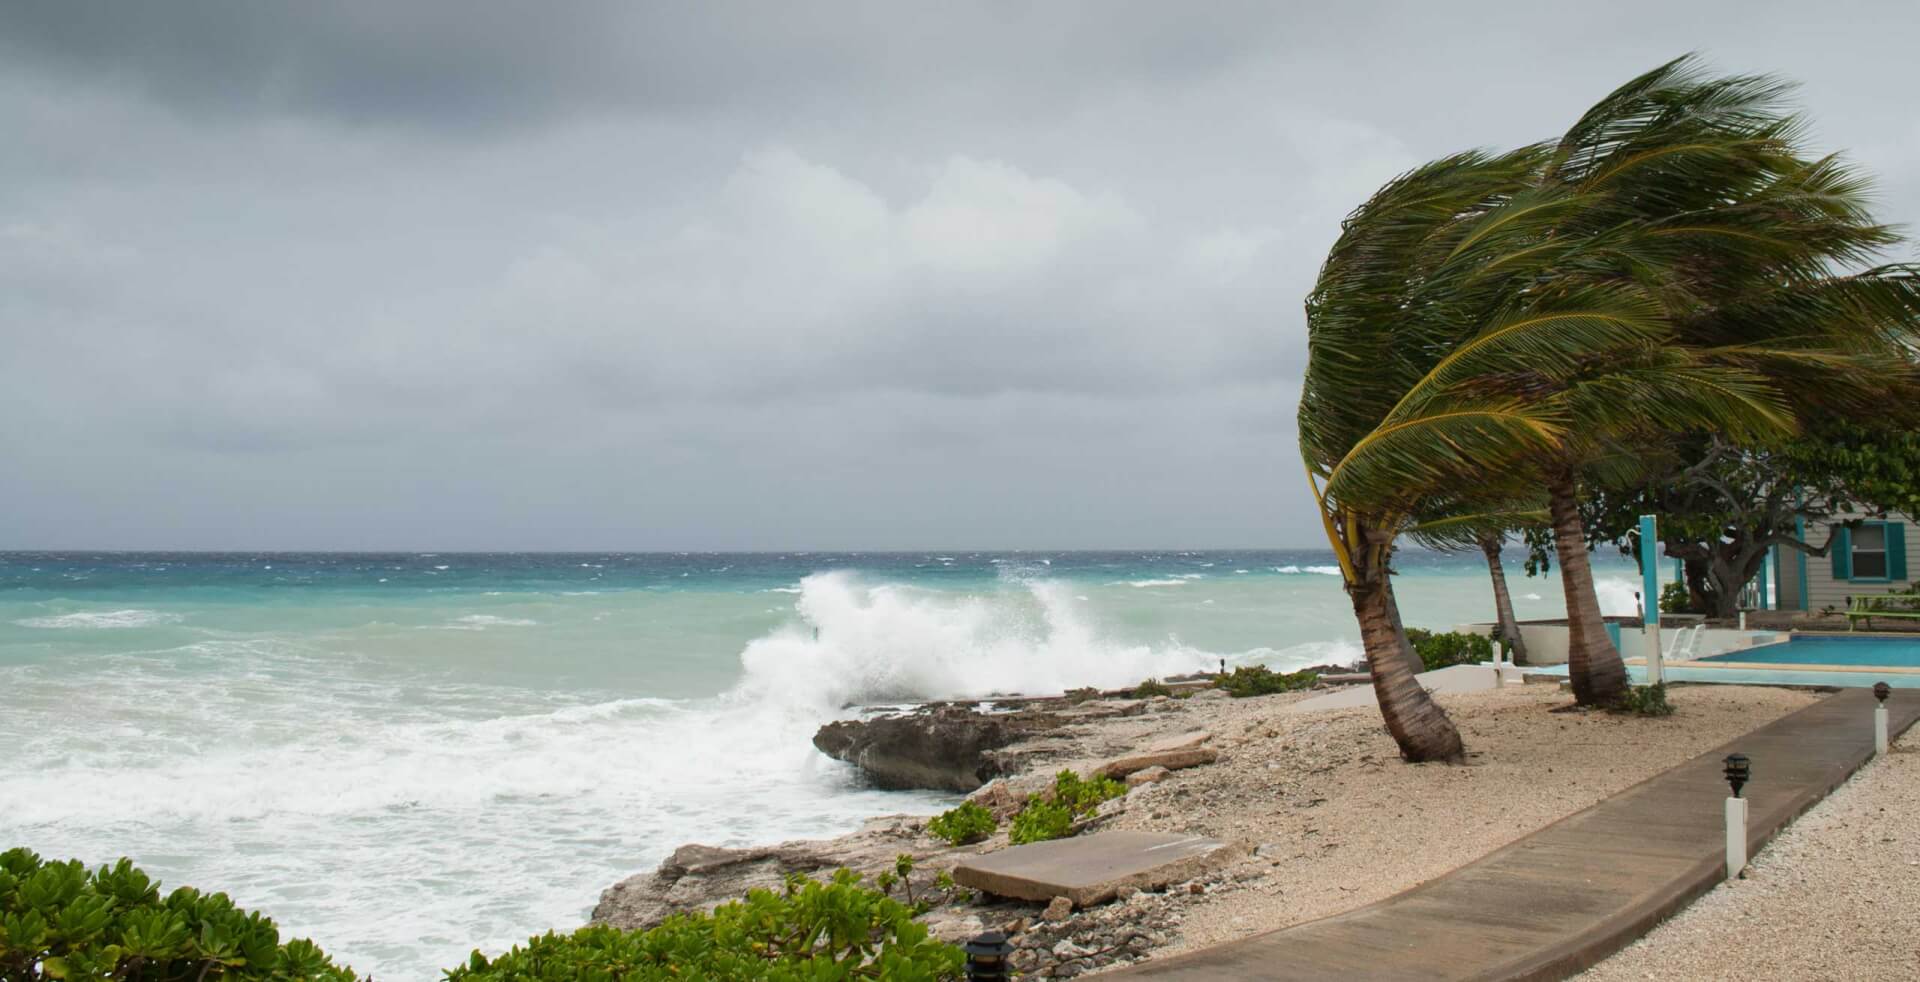 Palm trees on shore being blown from winds of hurricane